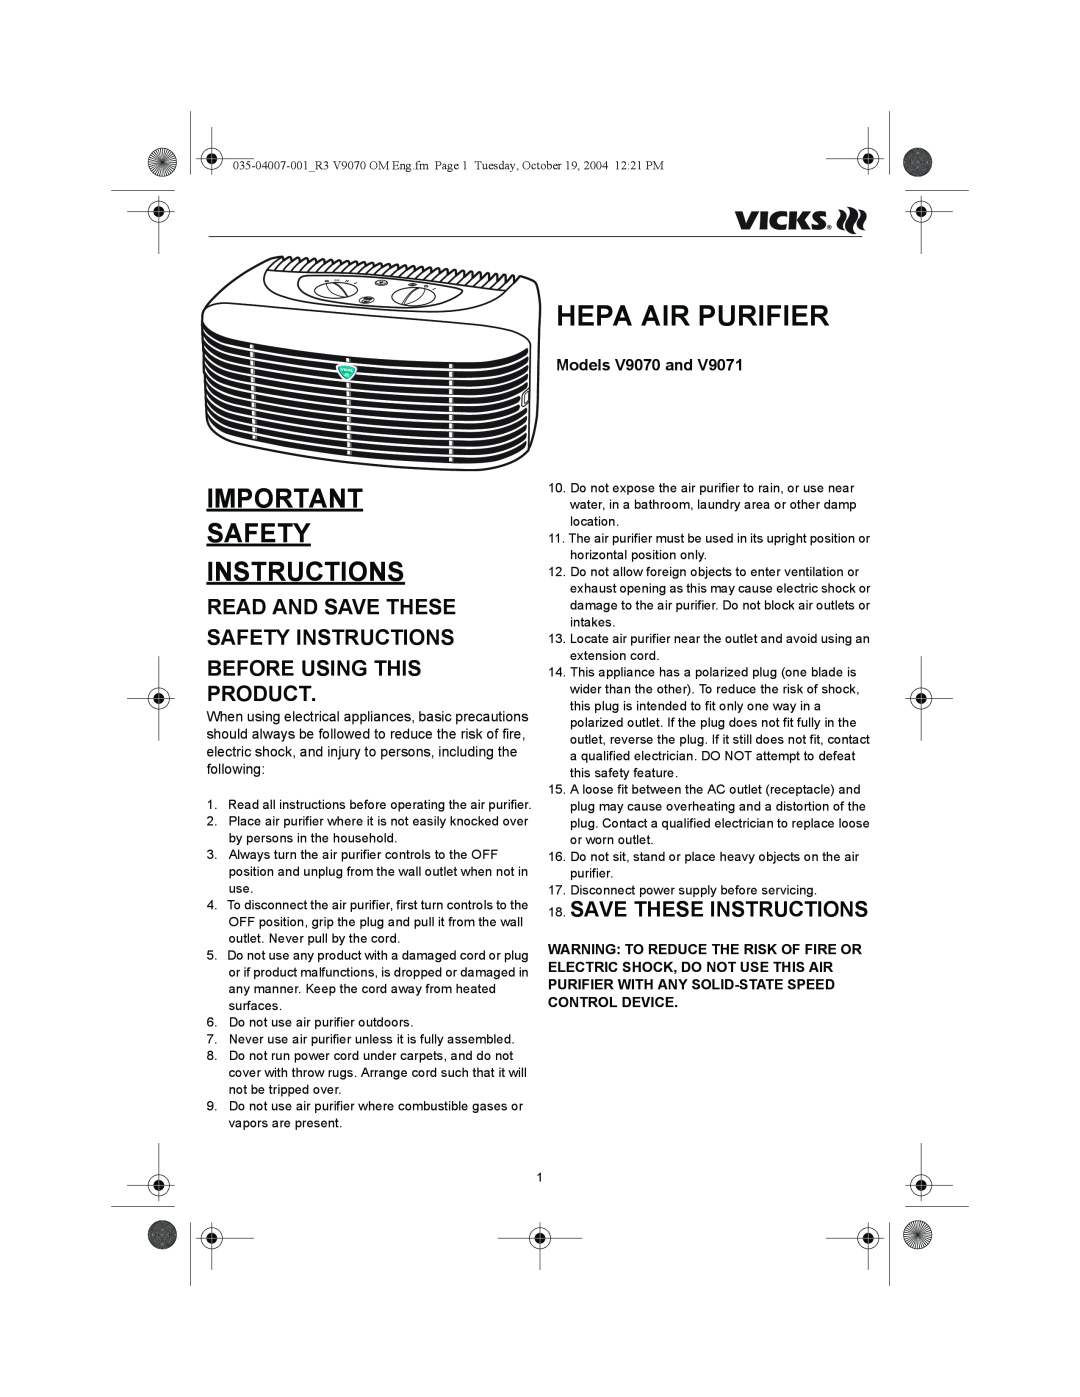 Vicks v9070 important safety instructions Hepa Air Purifier, Read And Save These Safety Instructions, Models V9070 and 